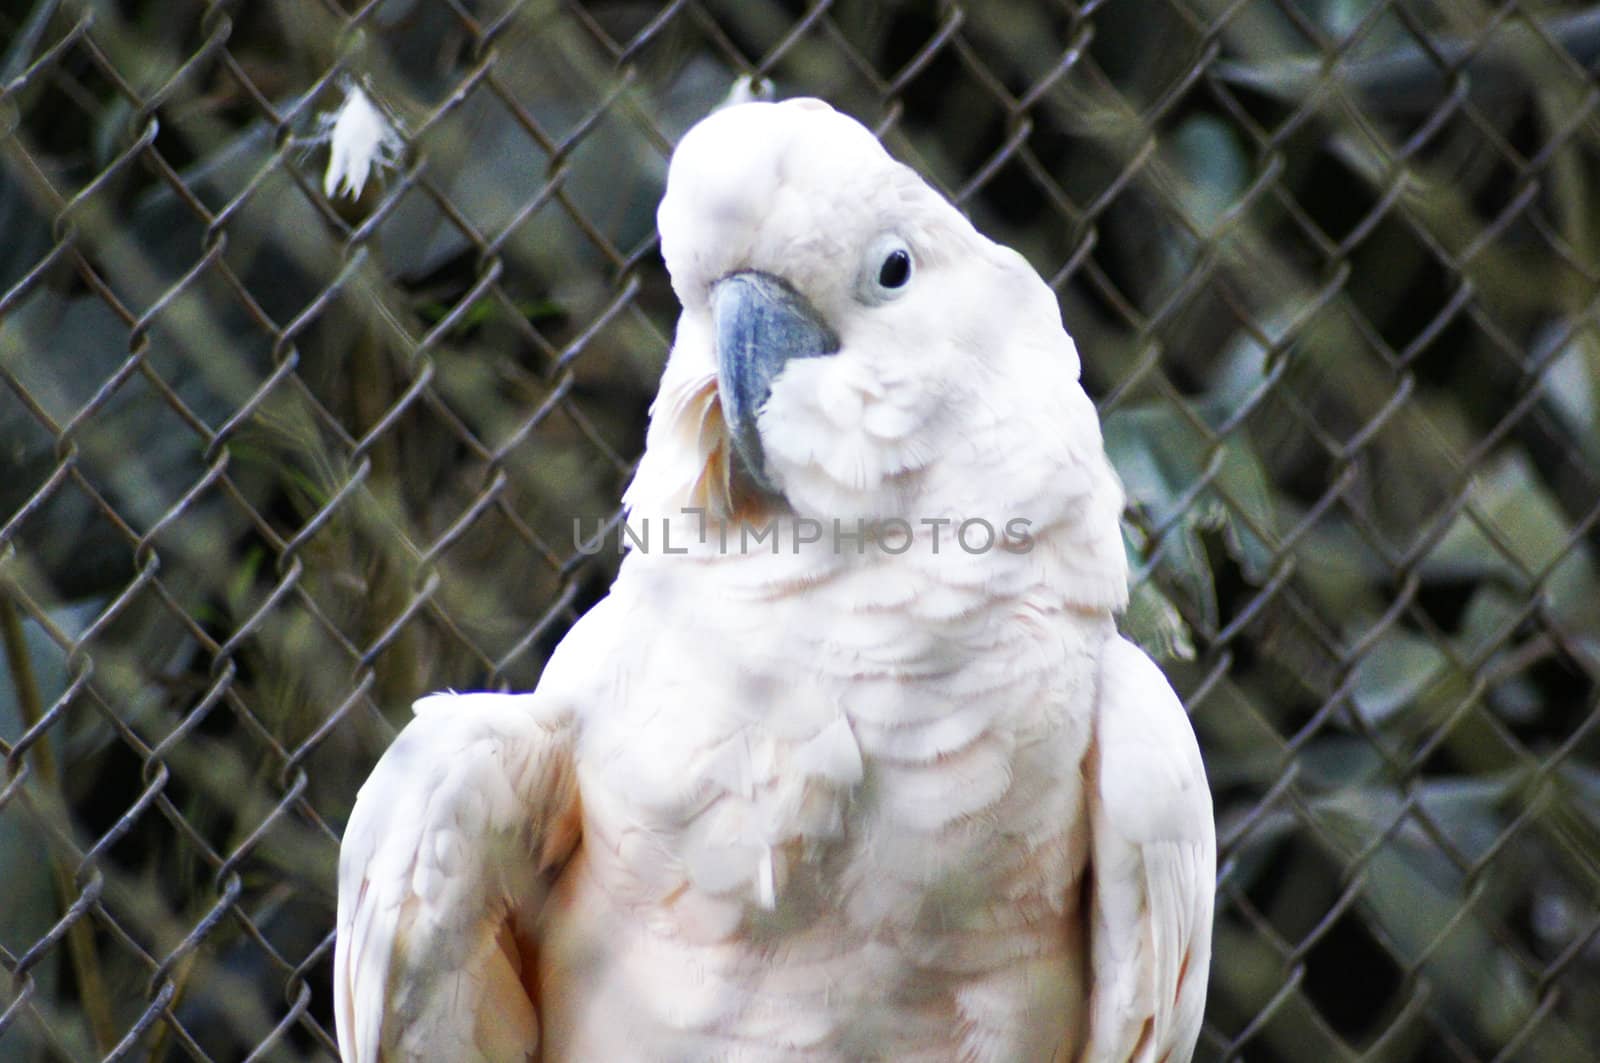 The cockatoos are birds belonging to the family cacatu�deos, similar to our parrots